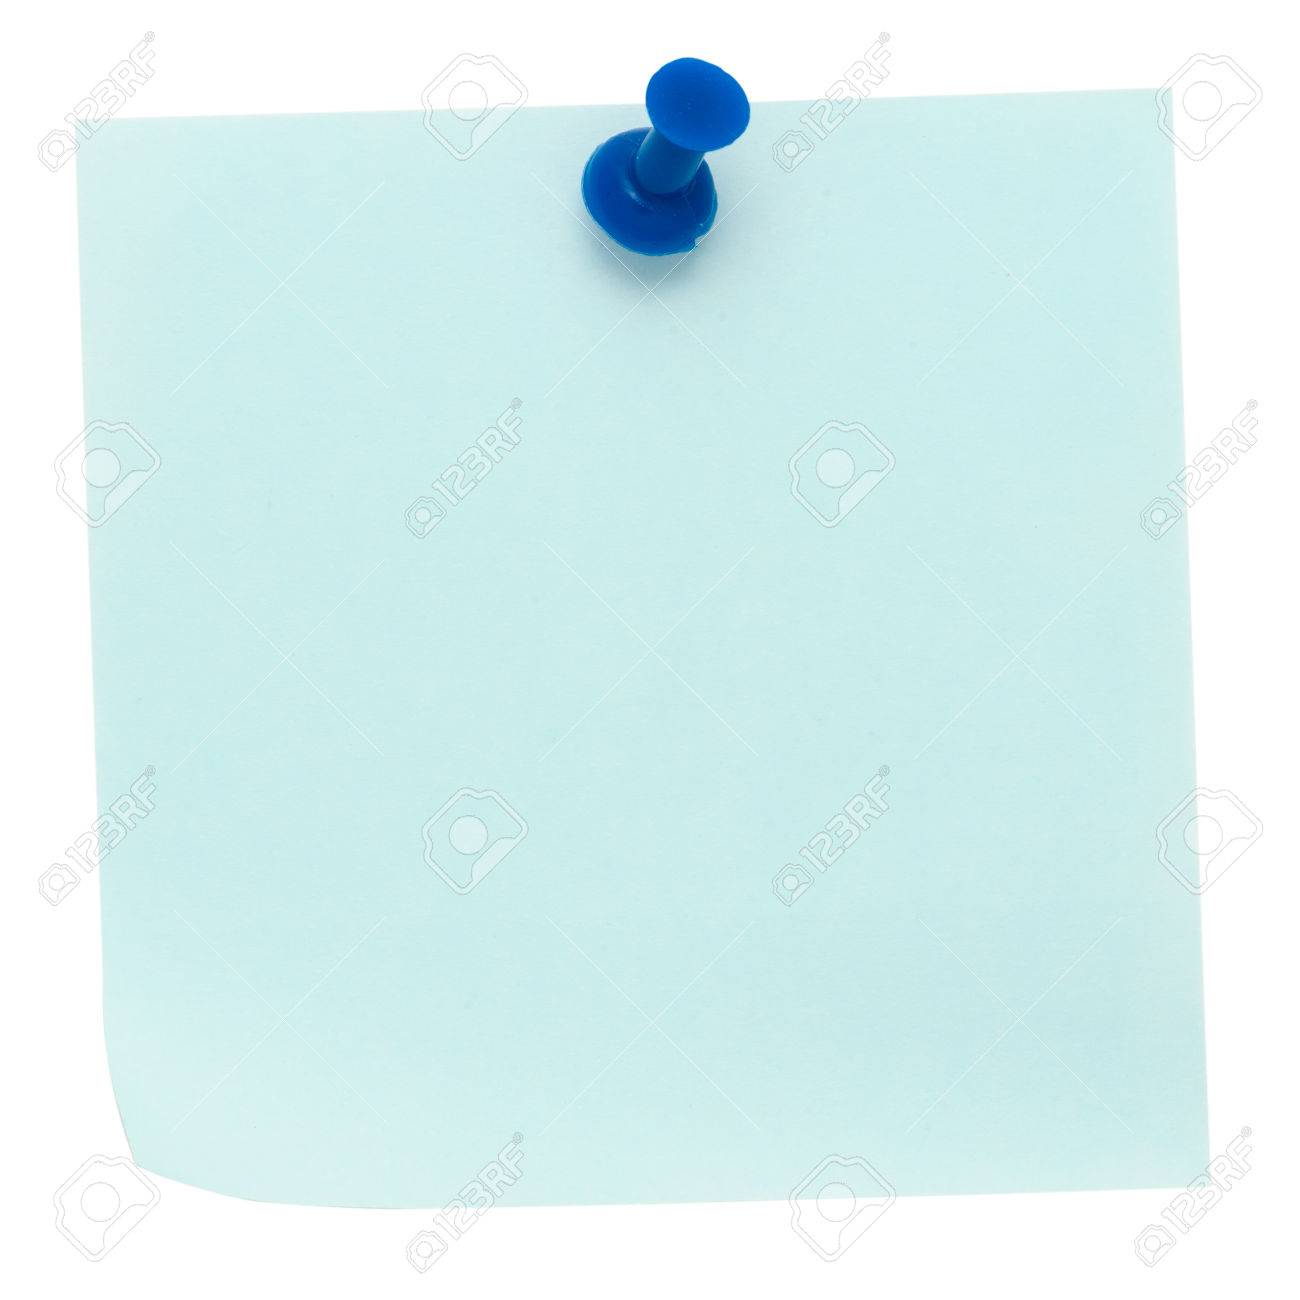 Blue Post it Note Pinned On A Pure White Background Waiting